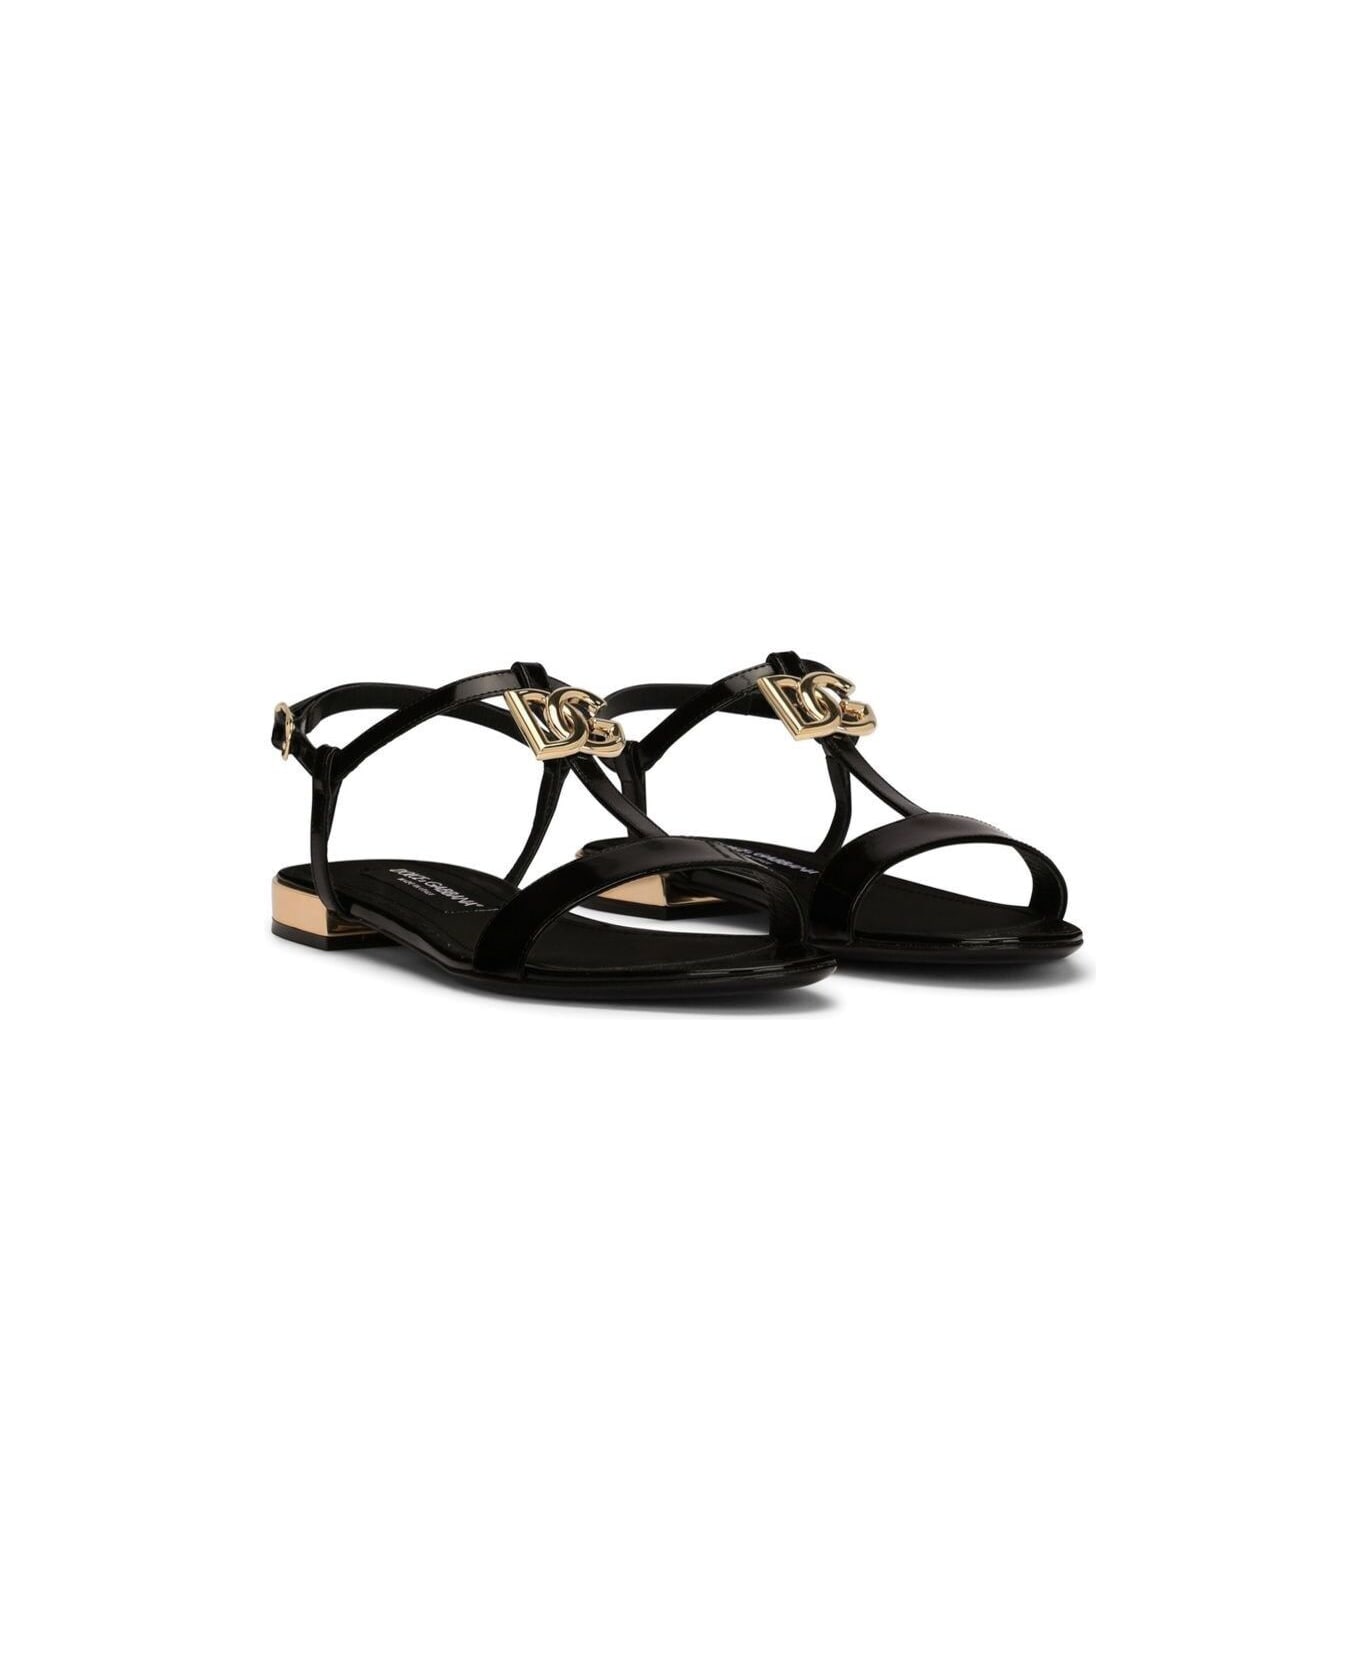 Dolce & Gabbana Black Low Sandals With Dg Logo In Polished Leather Woman - Black